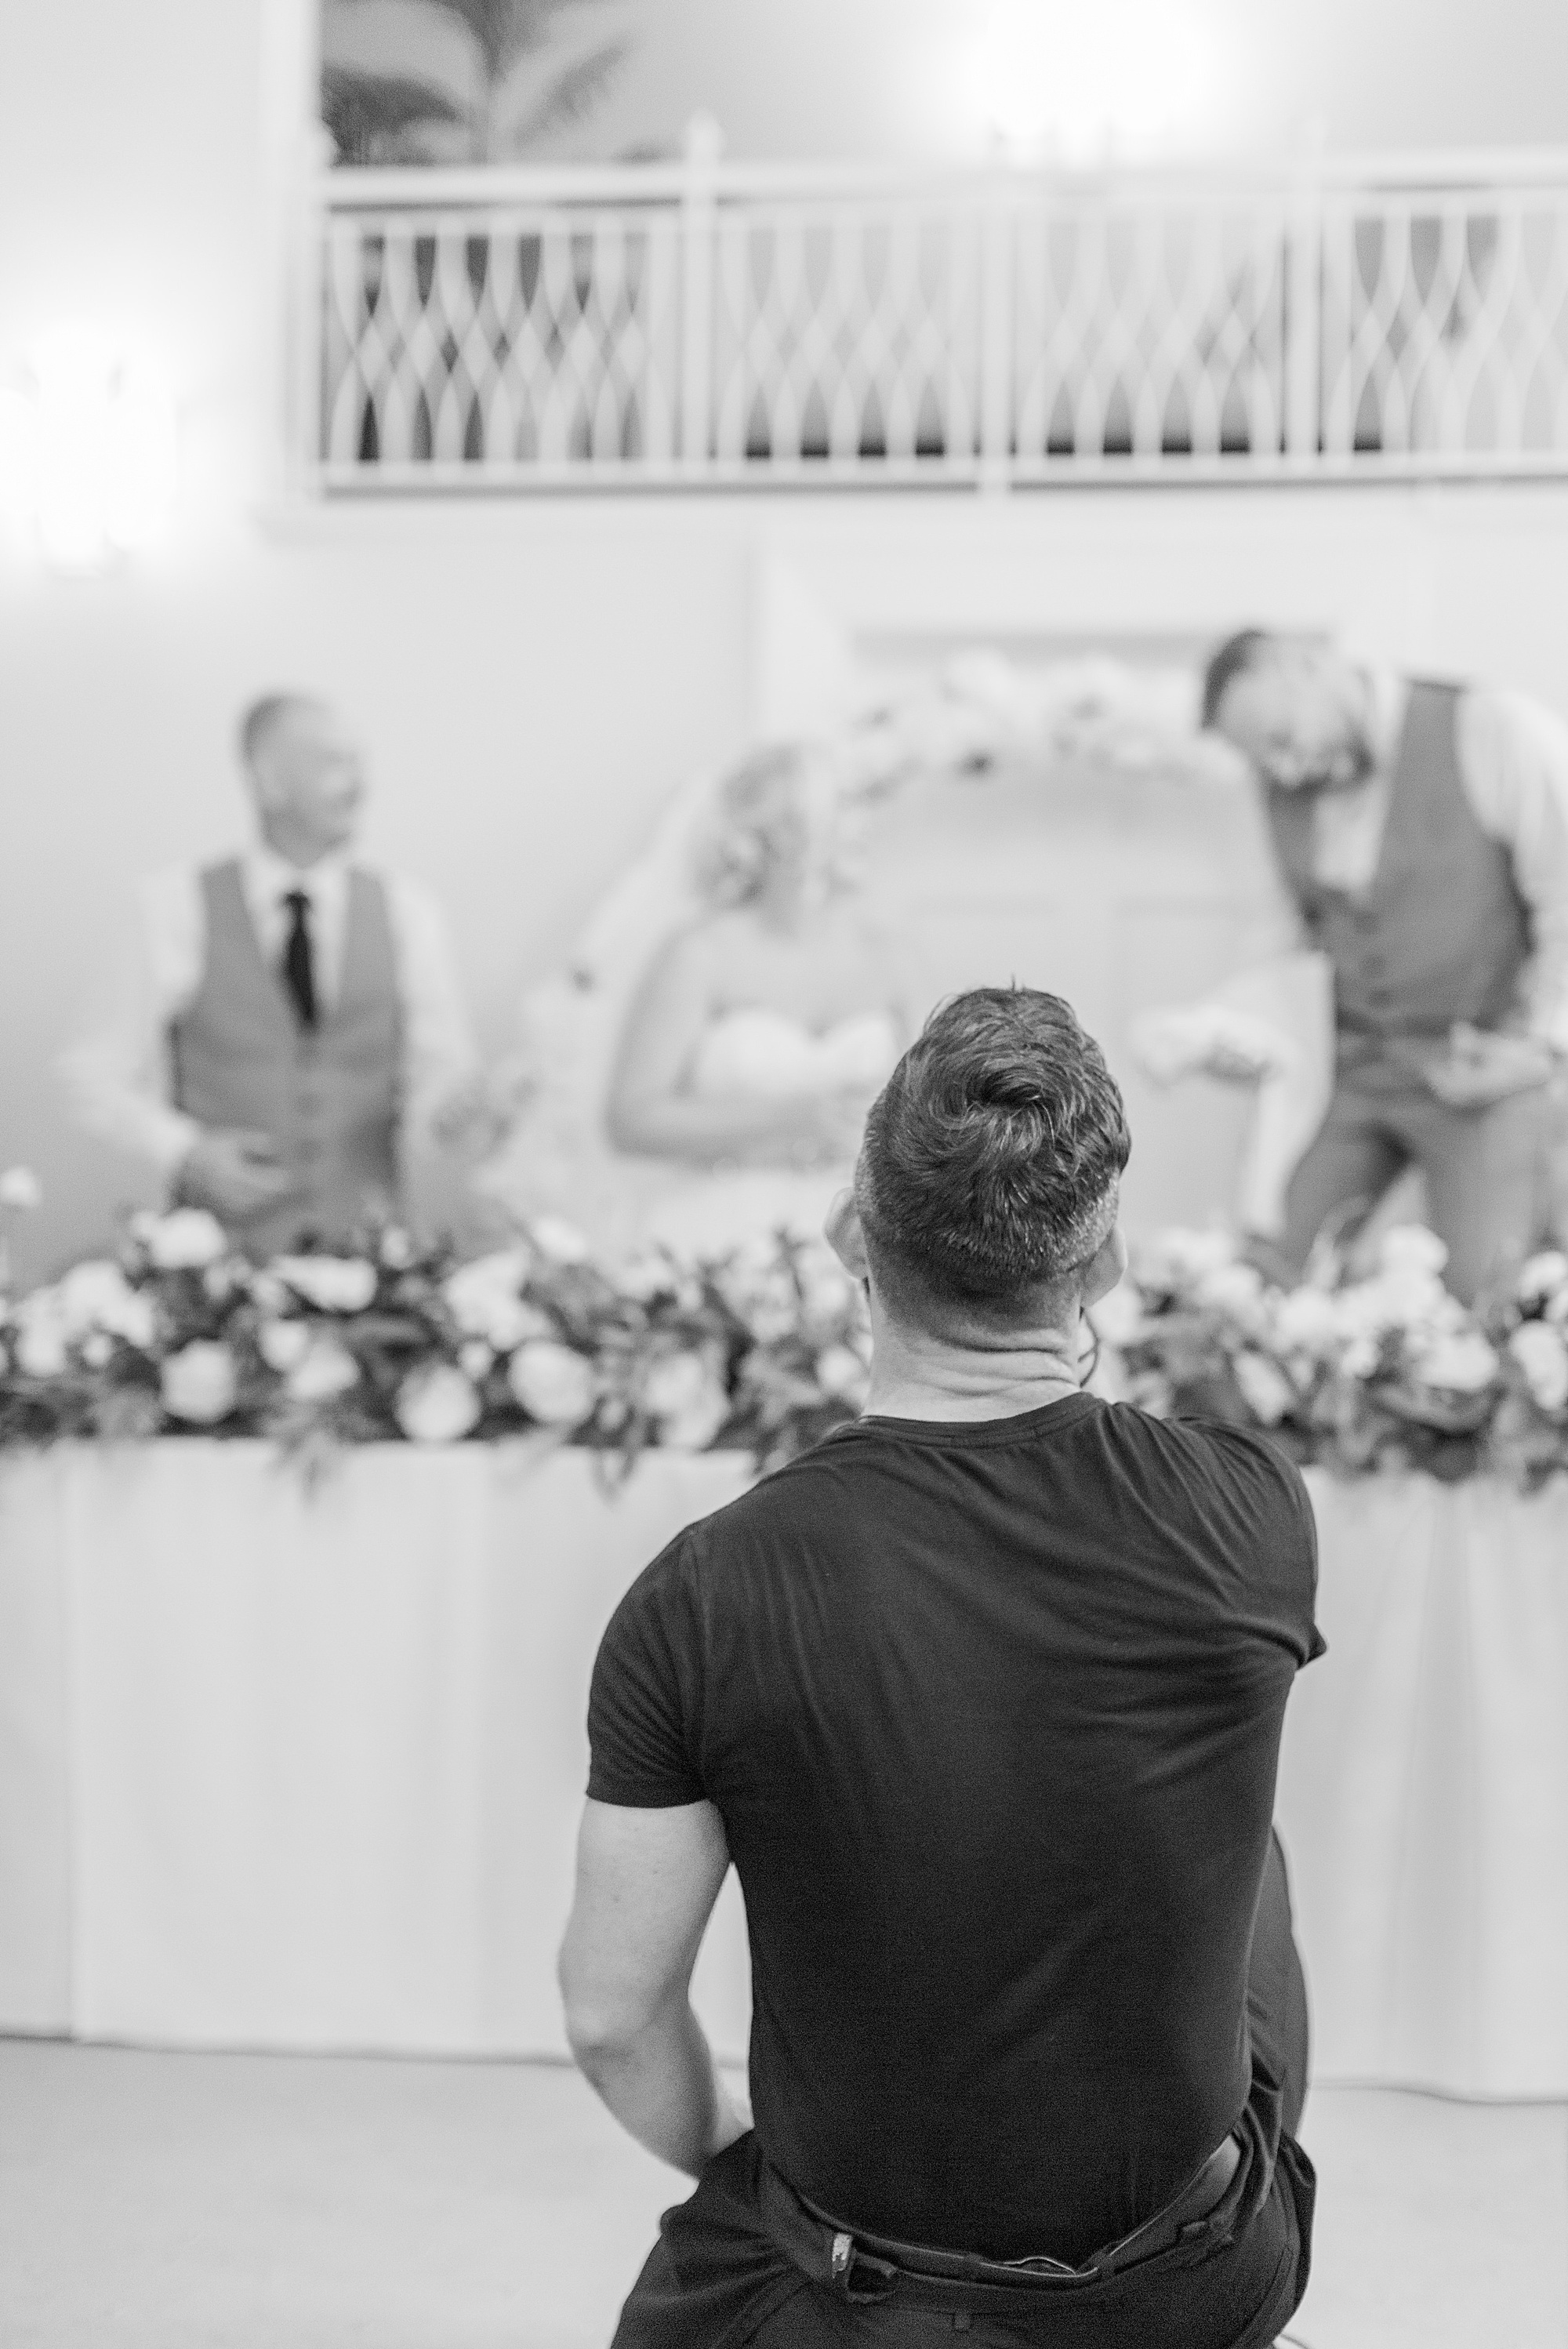 photo of a singing waiter kneeling performing at a wedding with the groom and bride in the background singing and dancing